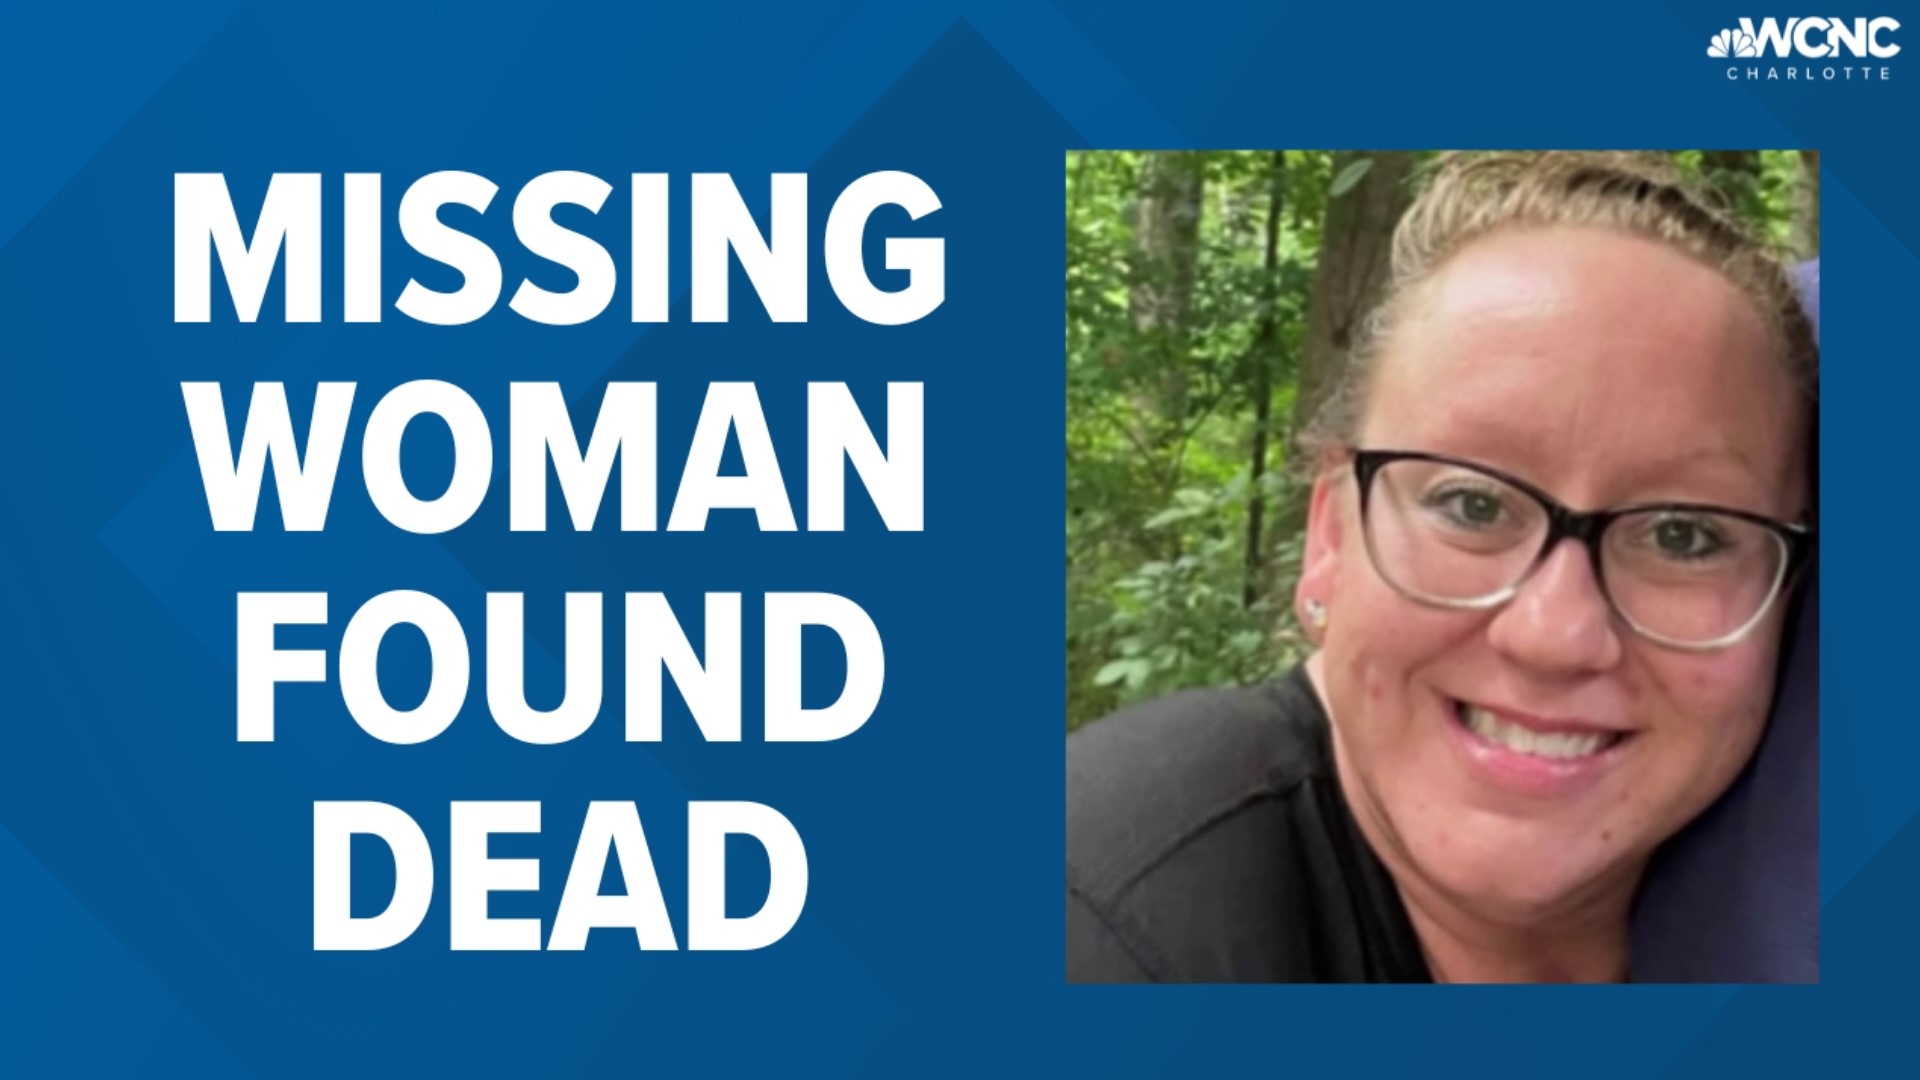 A Monroe woman who was reported missing back in February was found dead earlier this week, according to deputies.